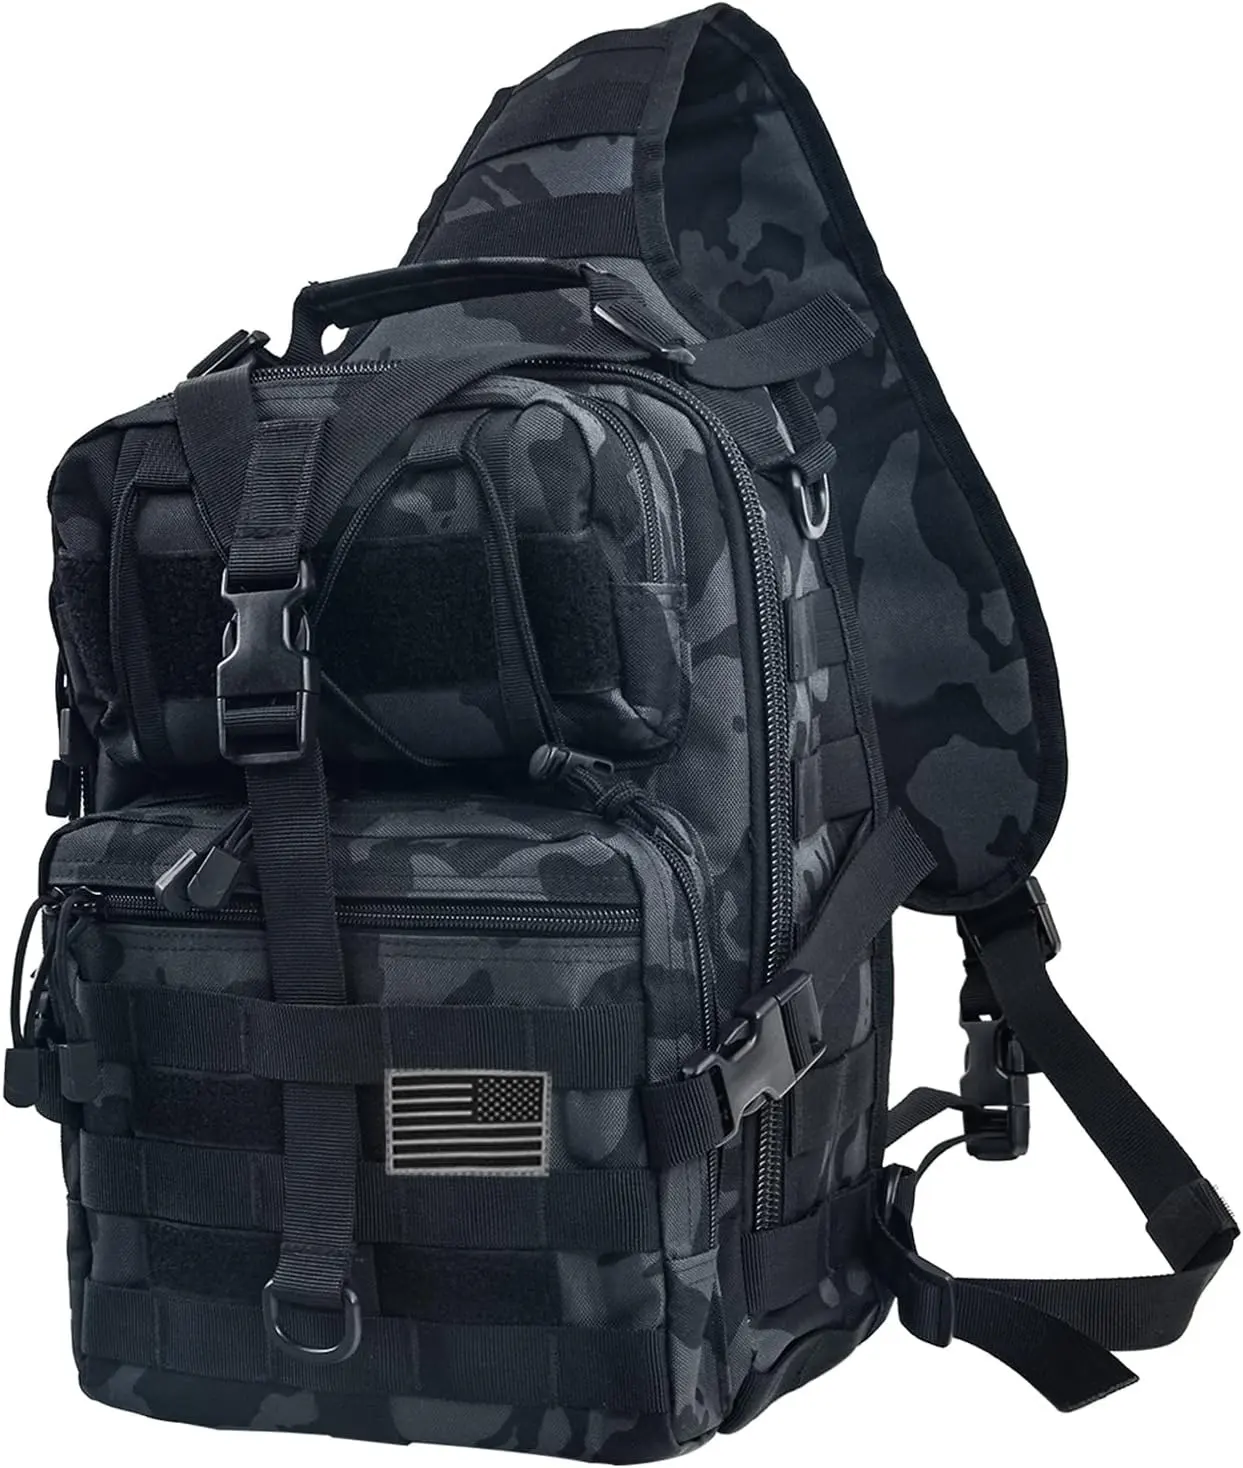 Outdoor Tactical Men's chest Bag Waterproof Oxford Messenger Bag Hiking Crossbody chest bag Molle Tactical Sling Backpack